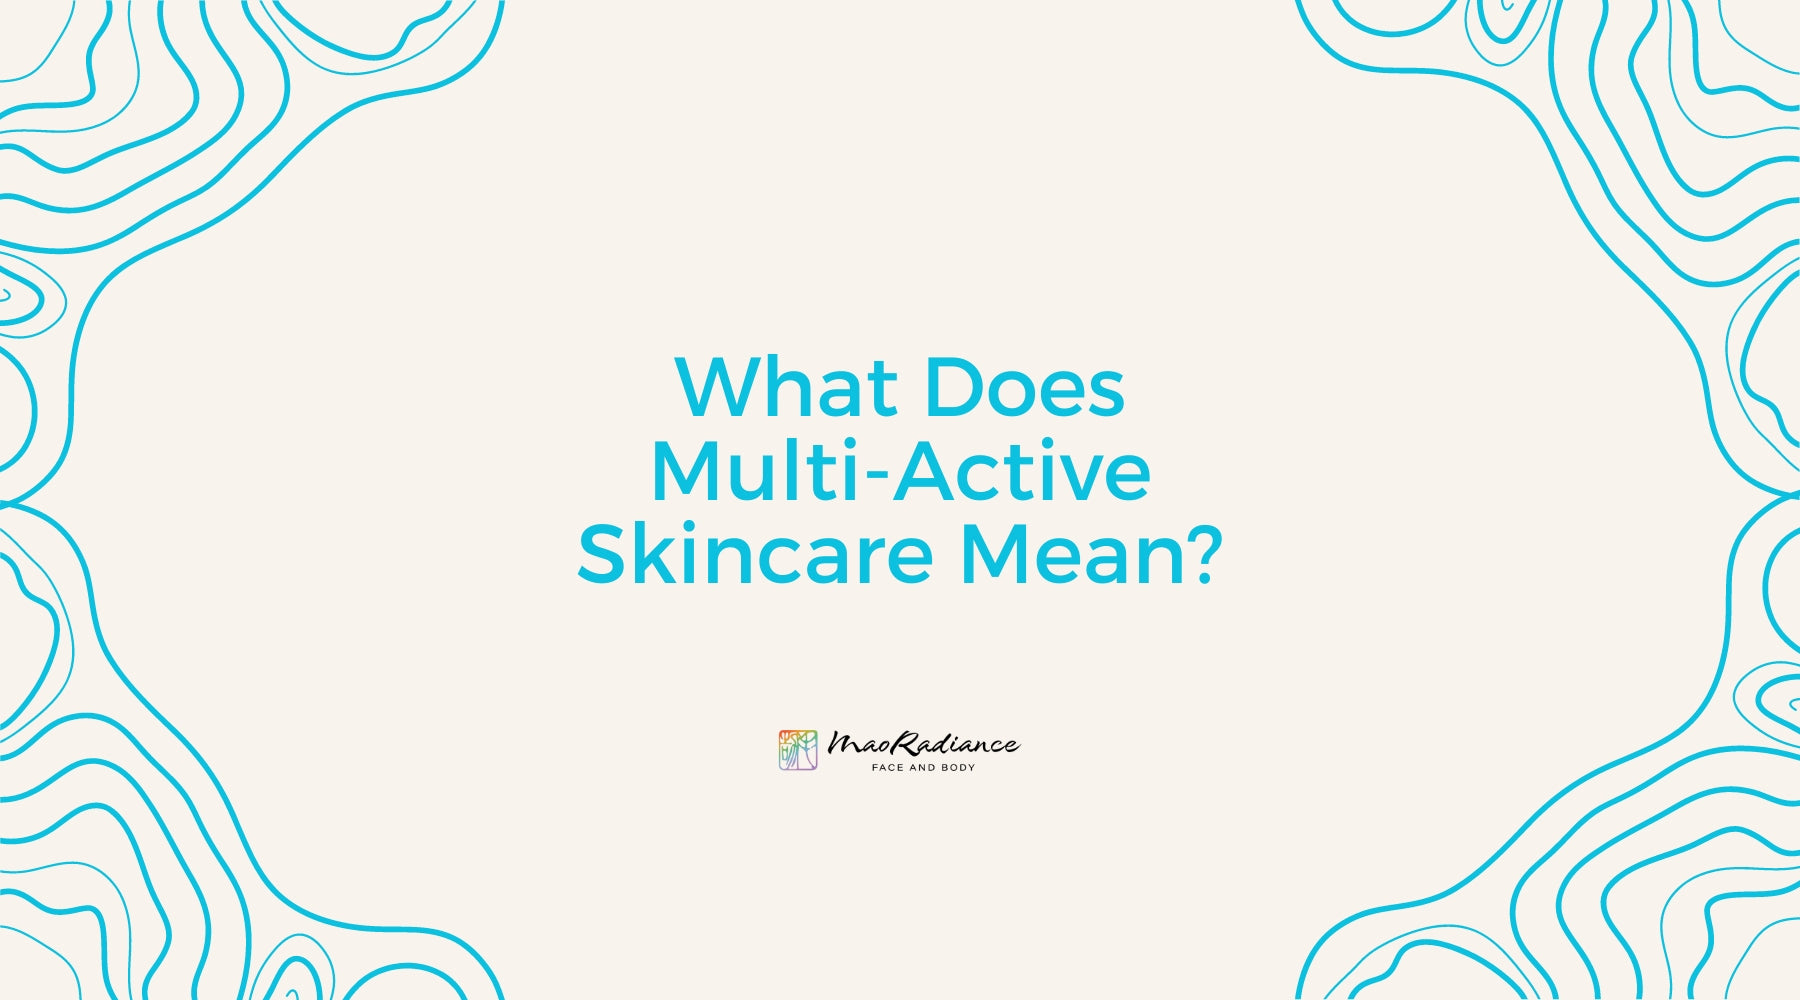 What does multi-active skincare mean?